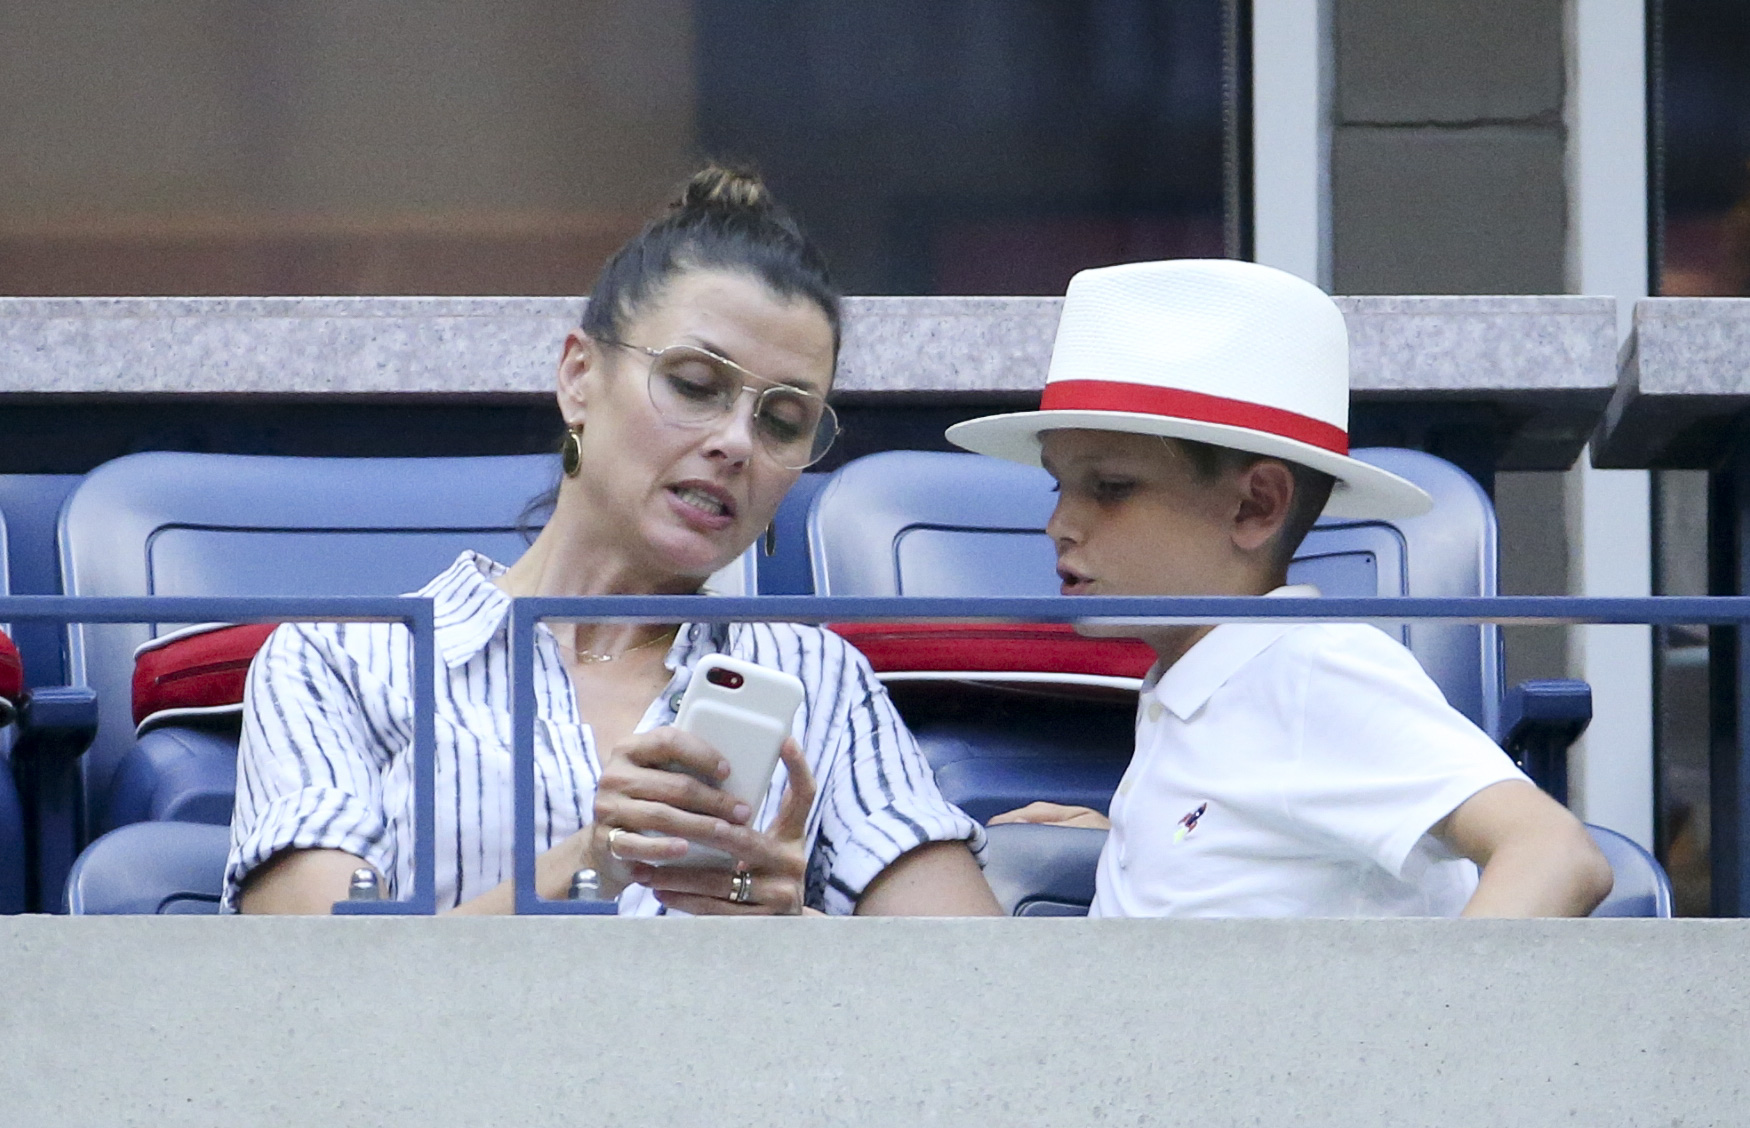 Bridget Moynahan with her son John Moynahan at the 2018 tennis US Open on August 29, 2018 in Queens, New York City | Source: Getty Images